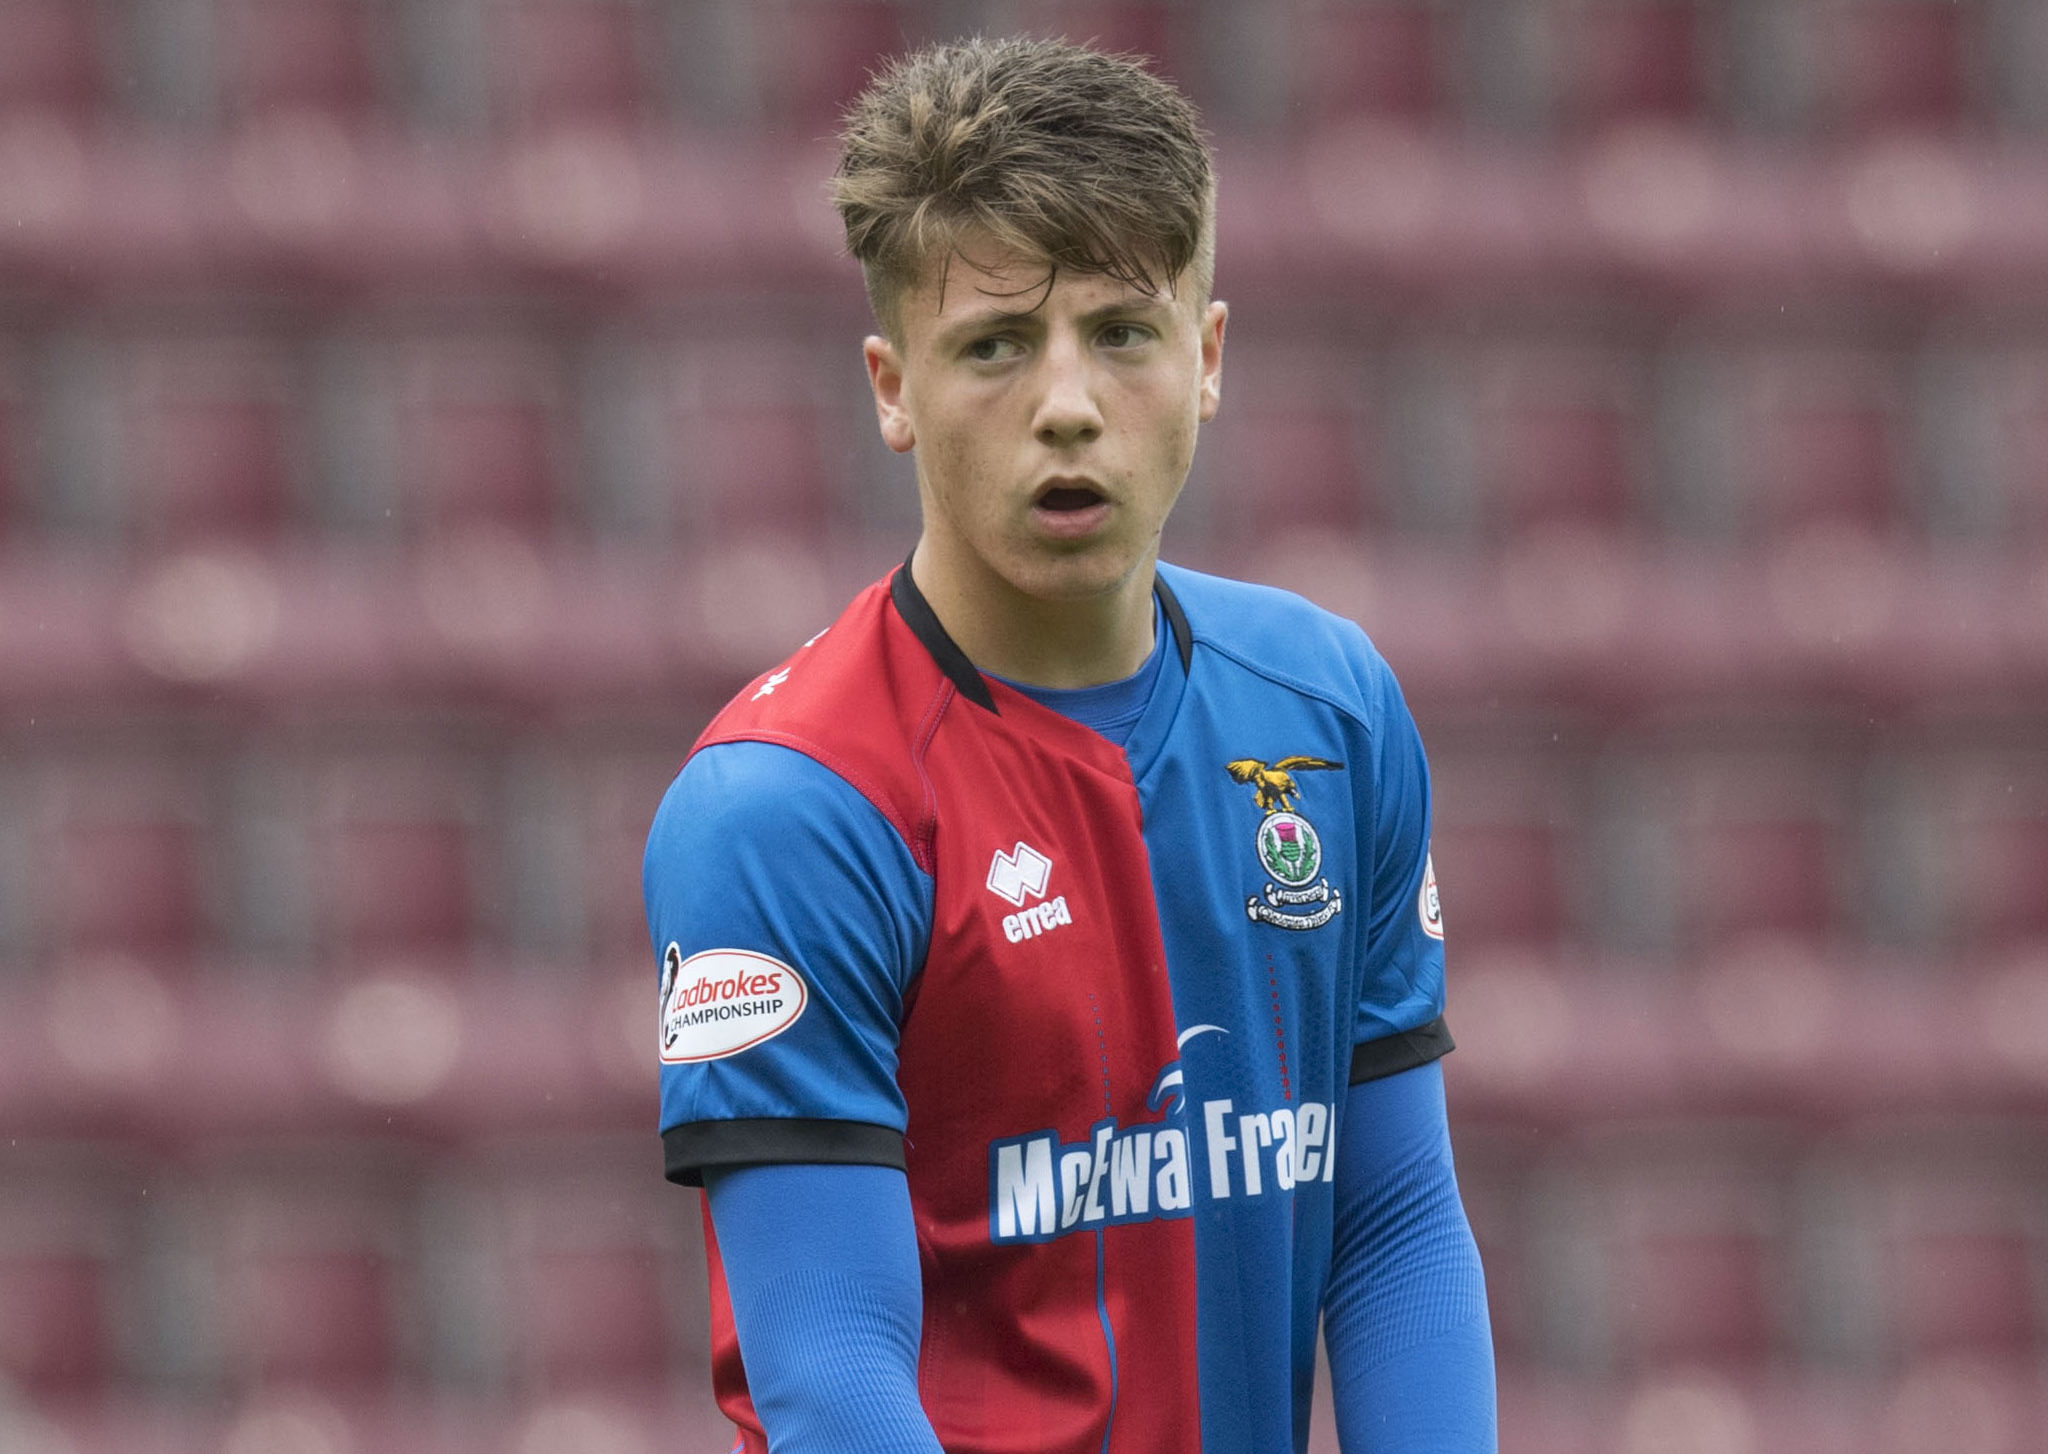 Daniel MacKay in action for Inverness.